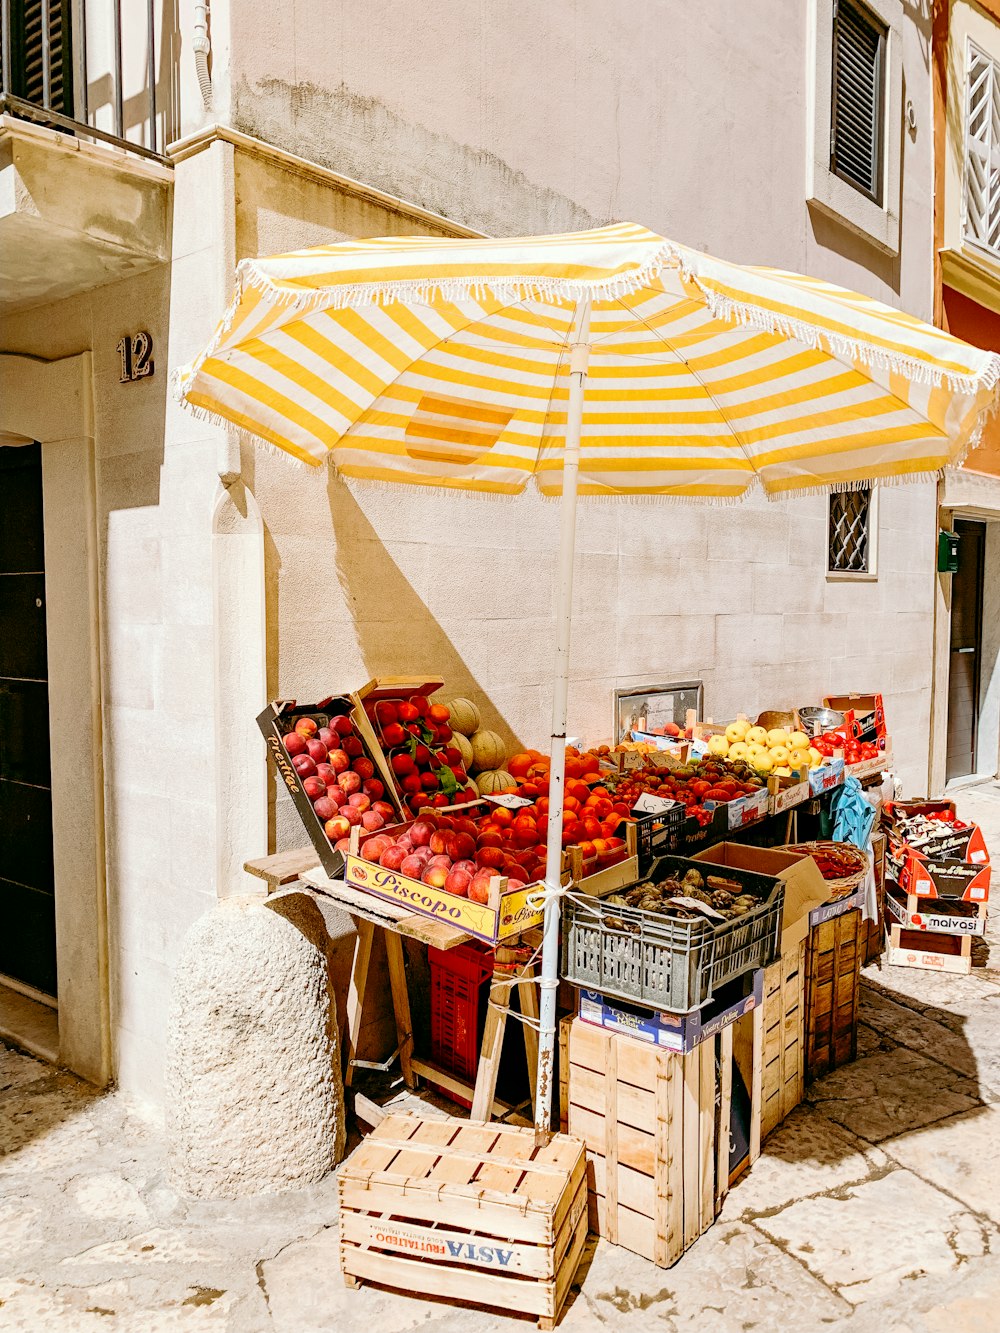 a yellow and white umbrella and some crates of fruit